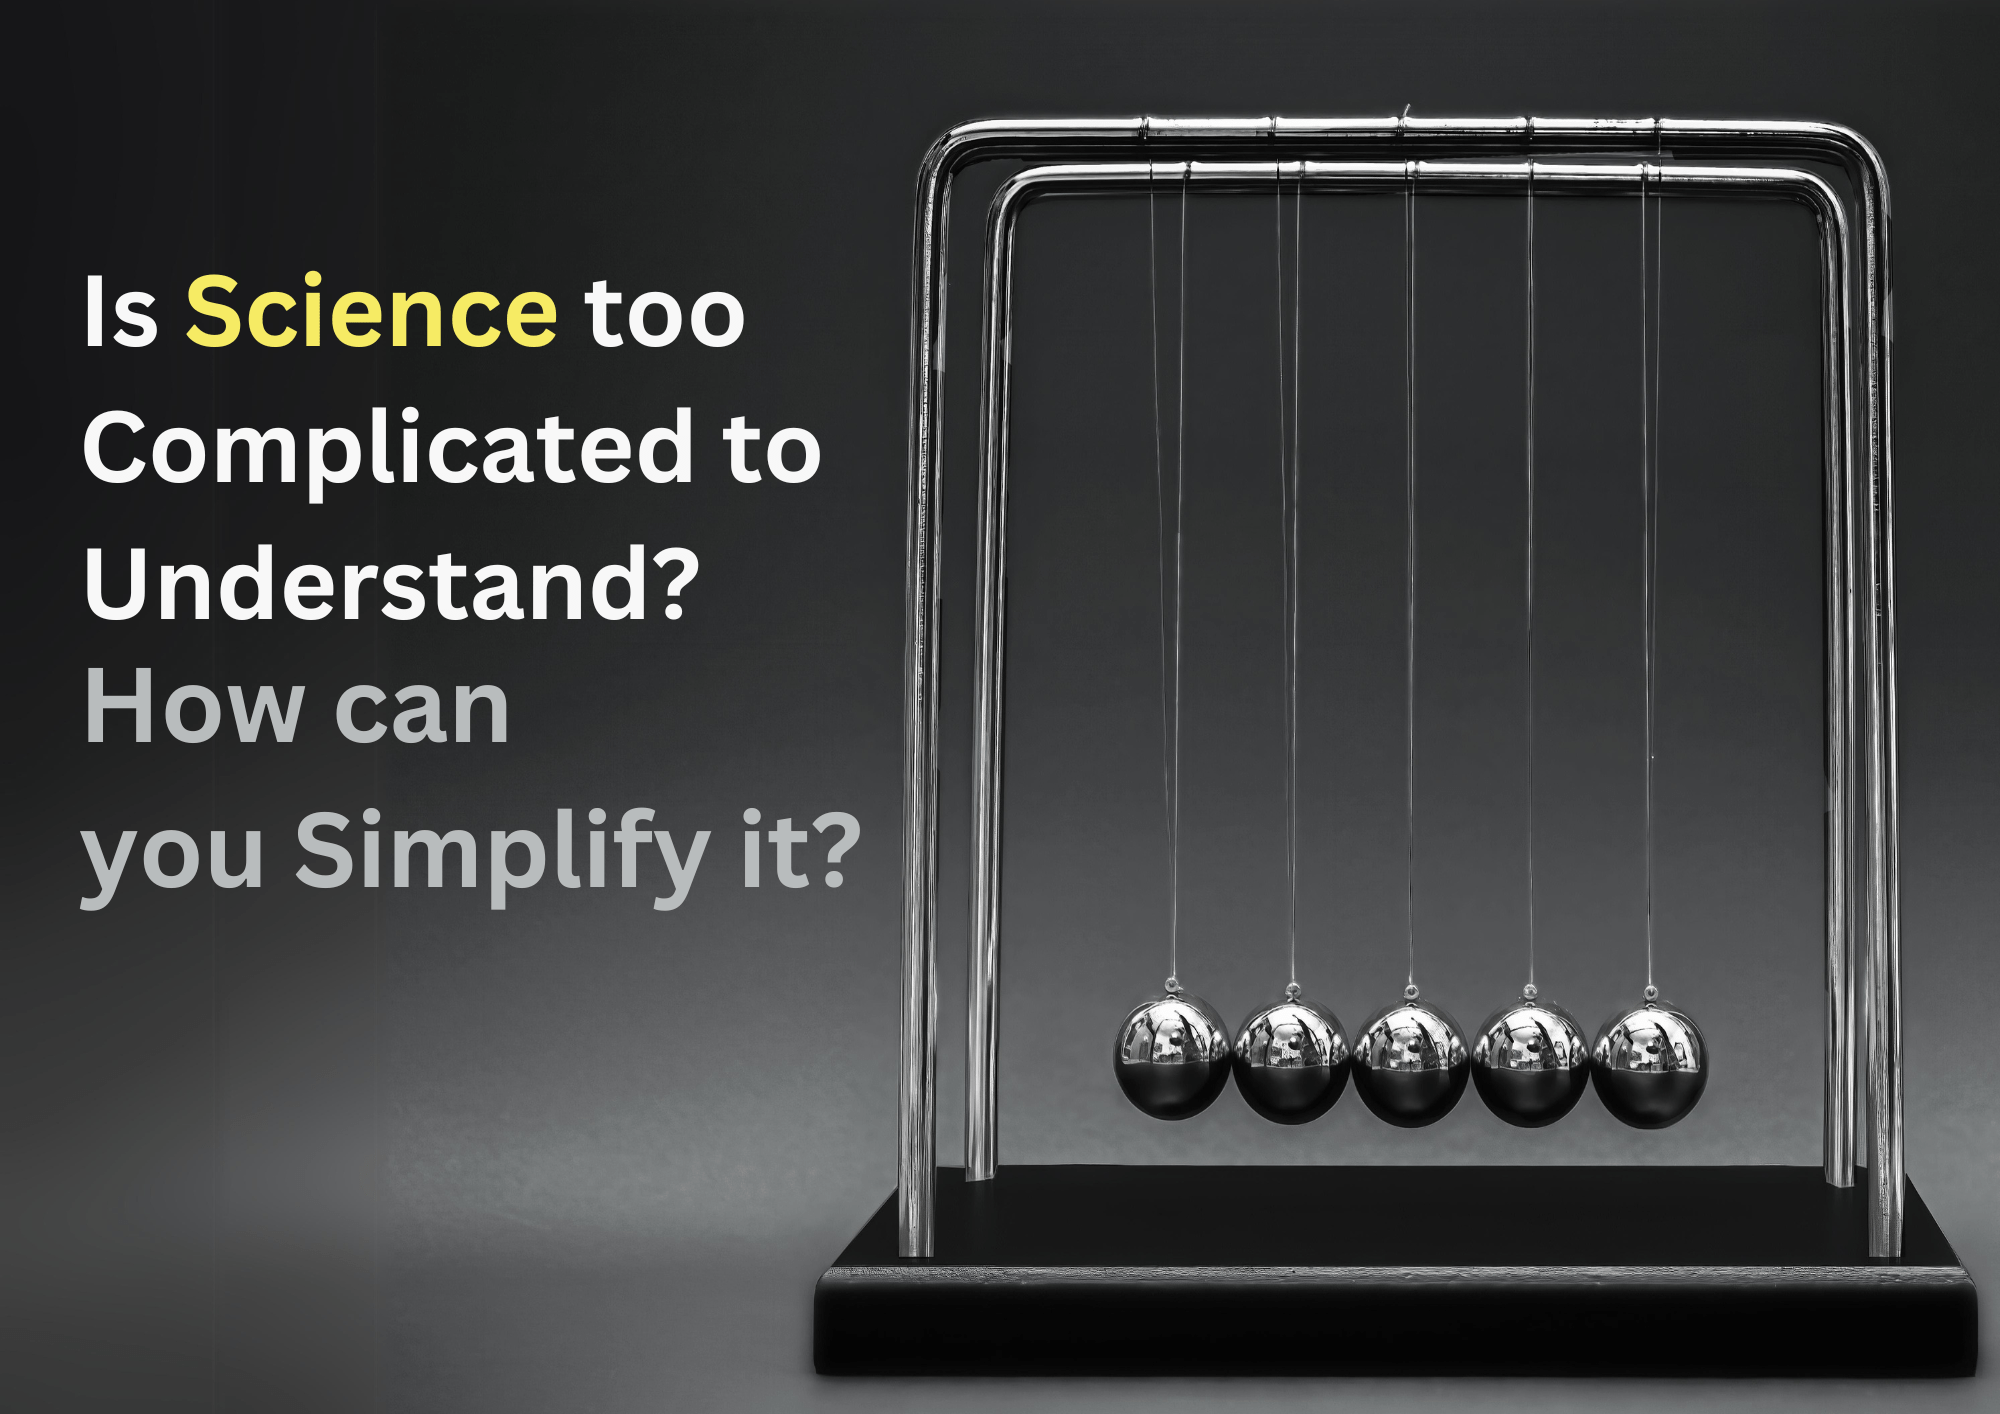 An image of a Newton’s cradle with five silver balls suspended on a frame, set against a black background. On the right side of the image, there is yellow text that reads ‘Is Science too Complicated to Understand? How can you Simplify it?